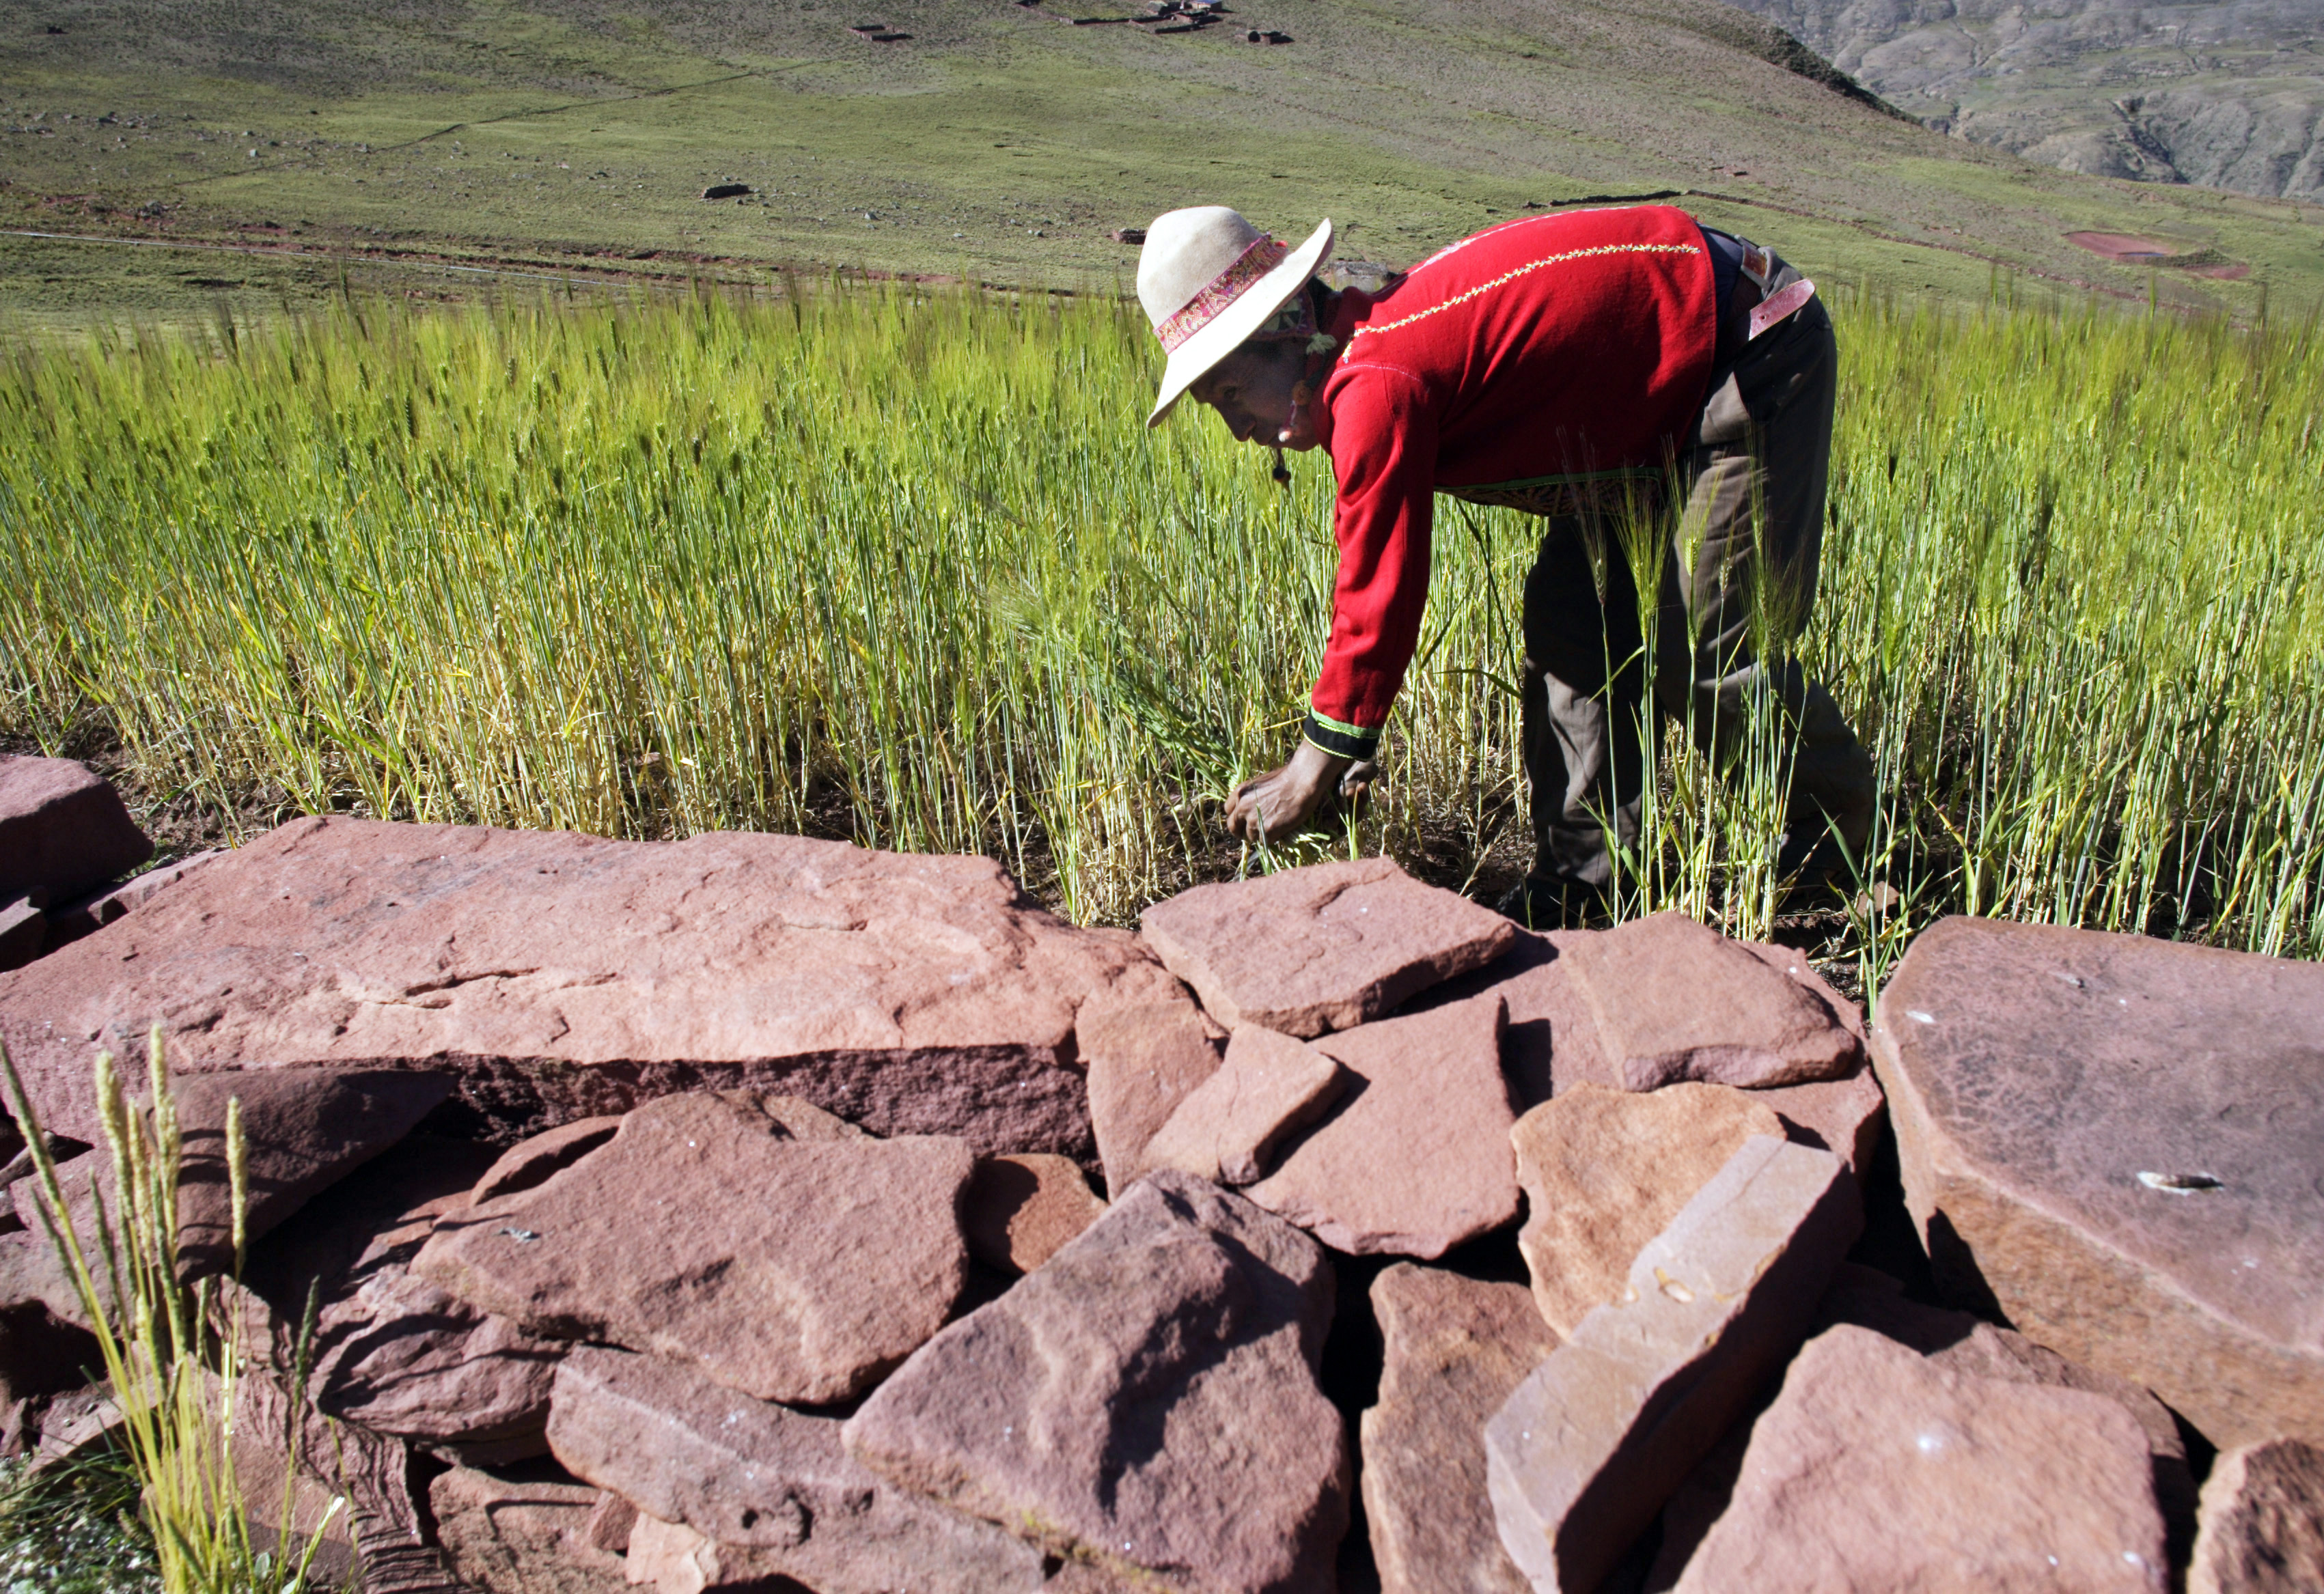 A Bolivian farmer in a wheat field. The construction of stone walls protects farmland from erosion.